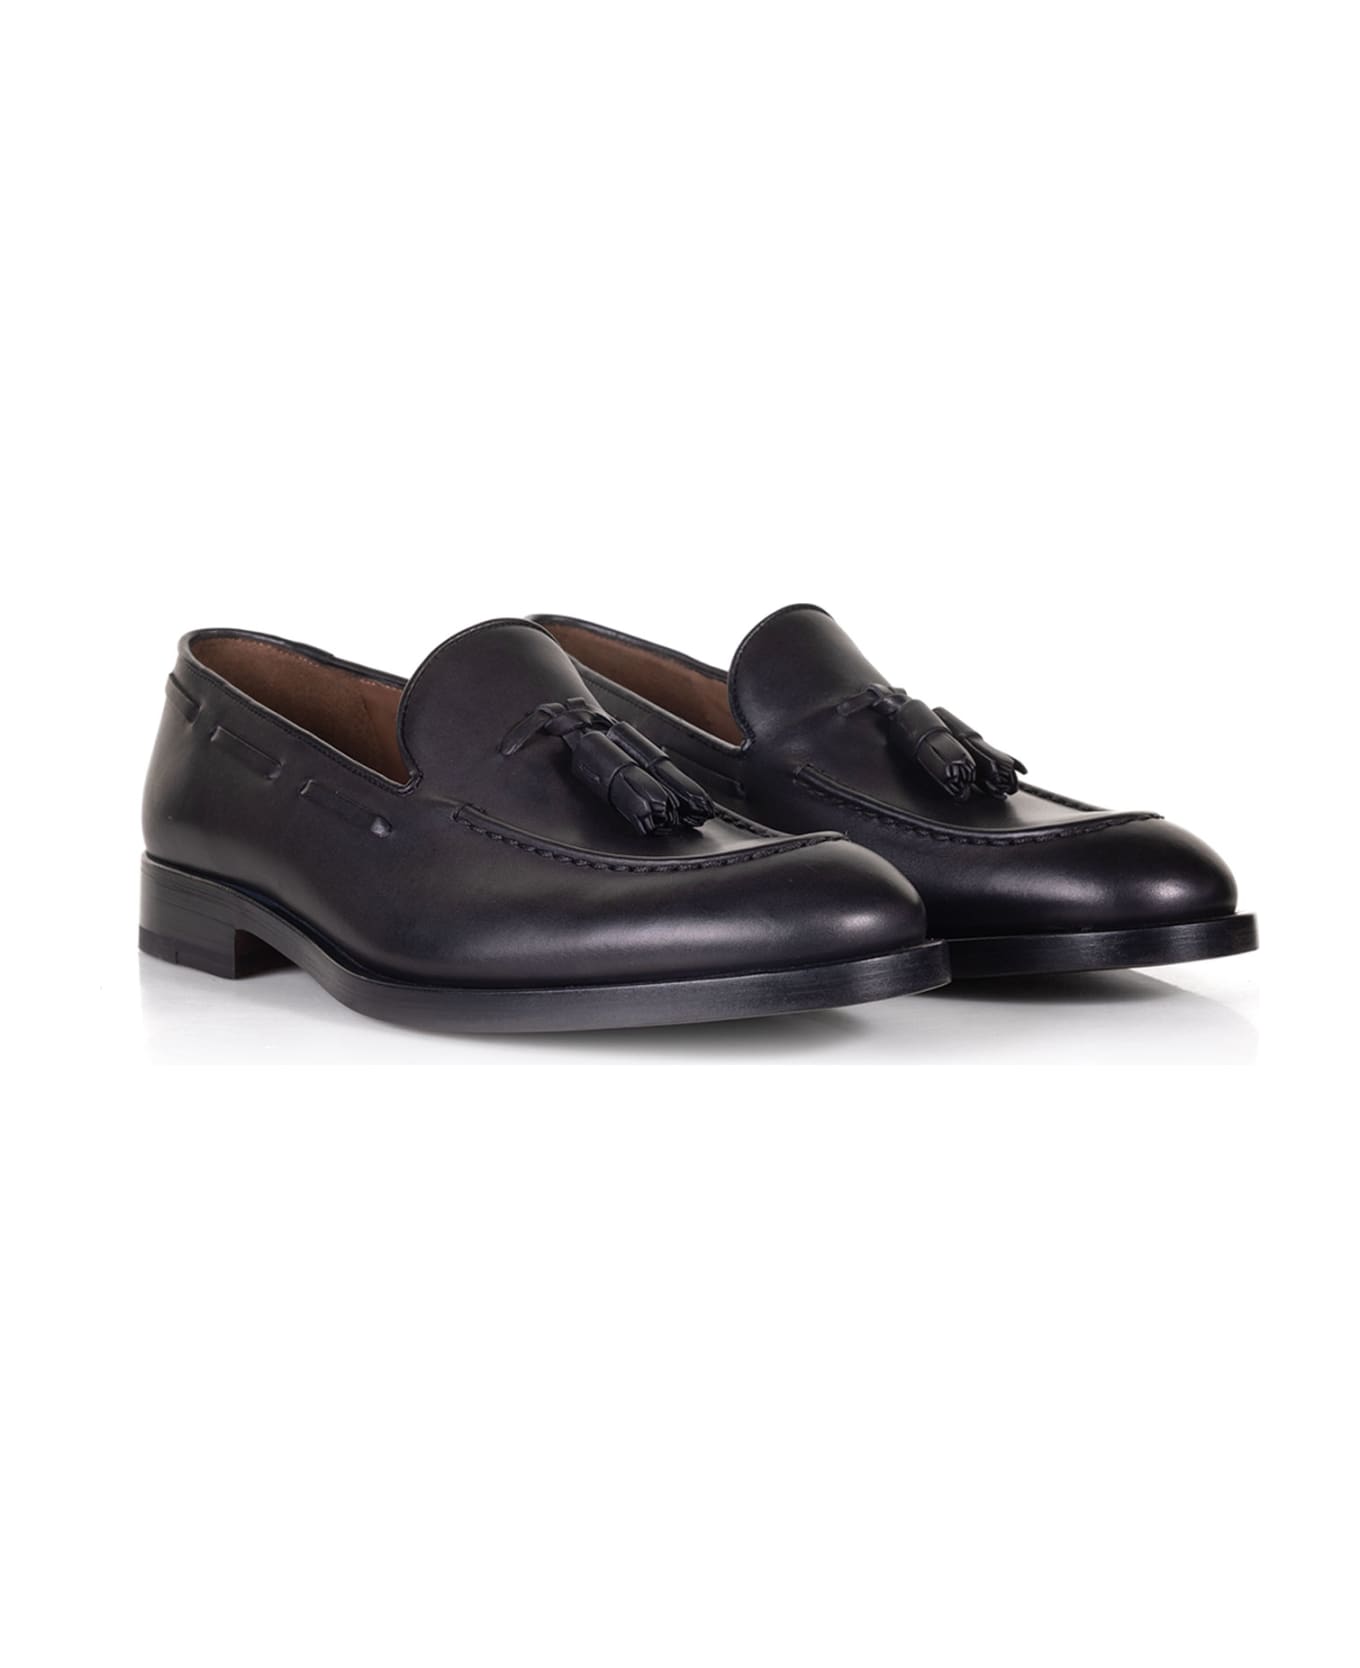 Fratelli Rossetti Leather Loafers With Tassels - NERO